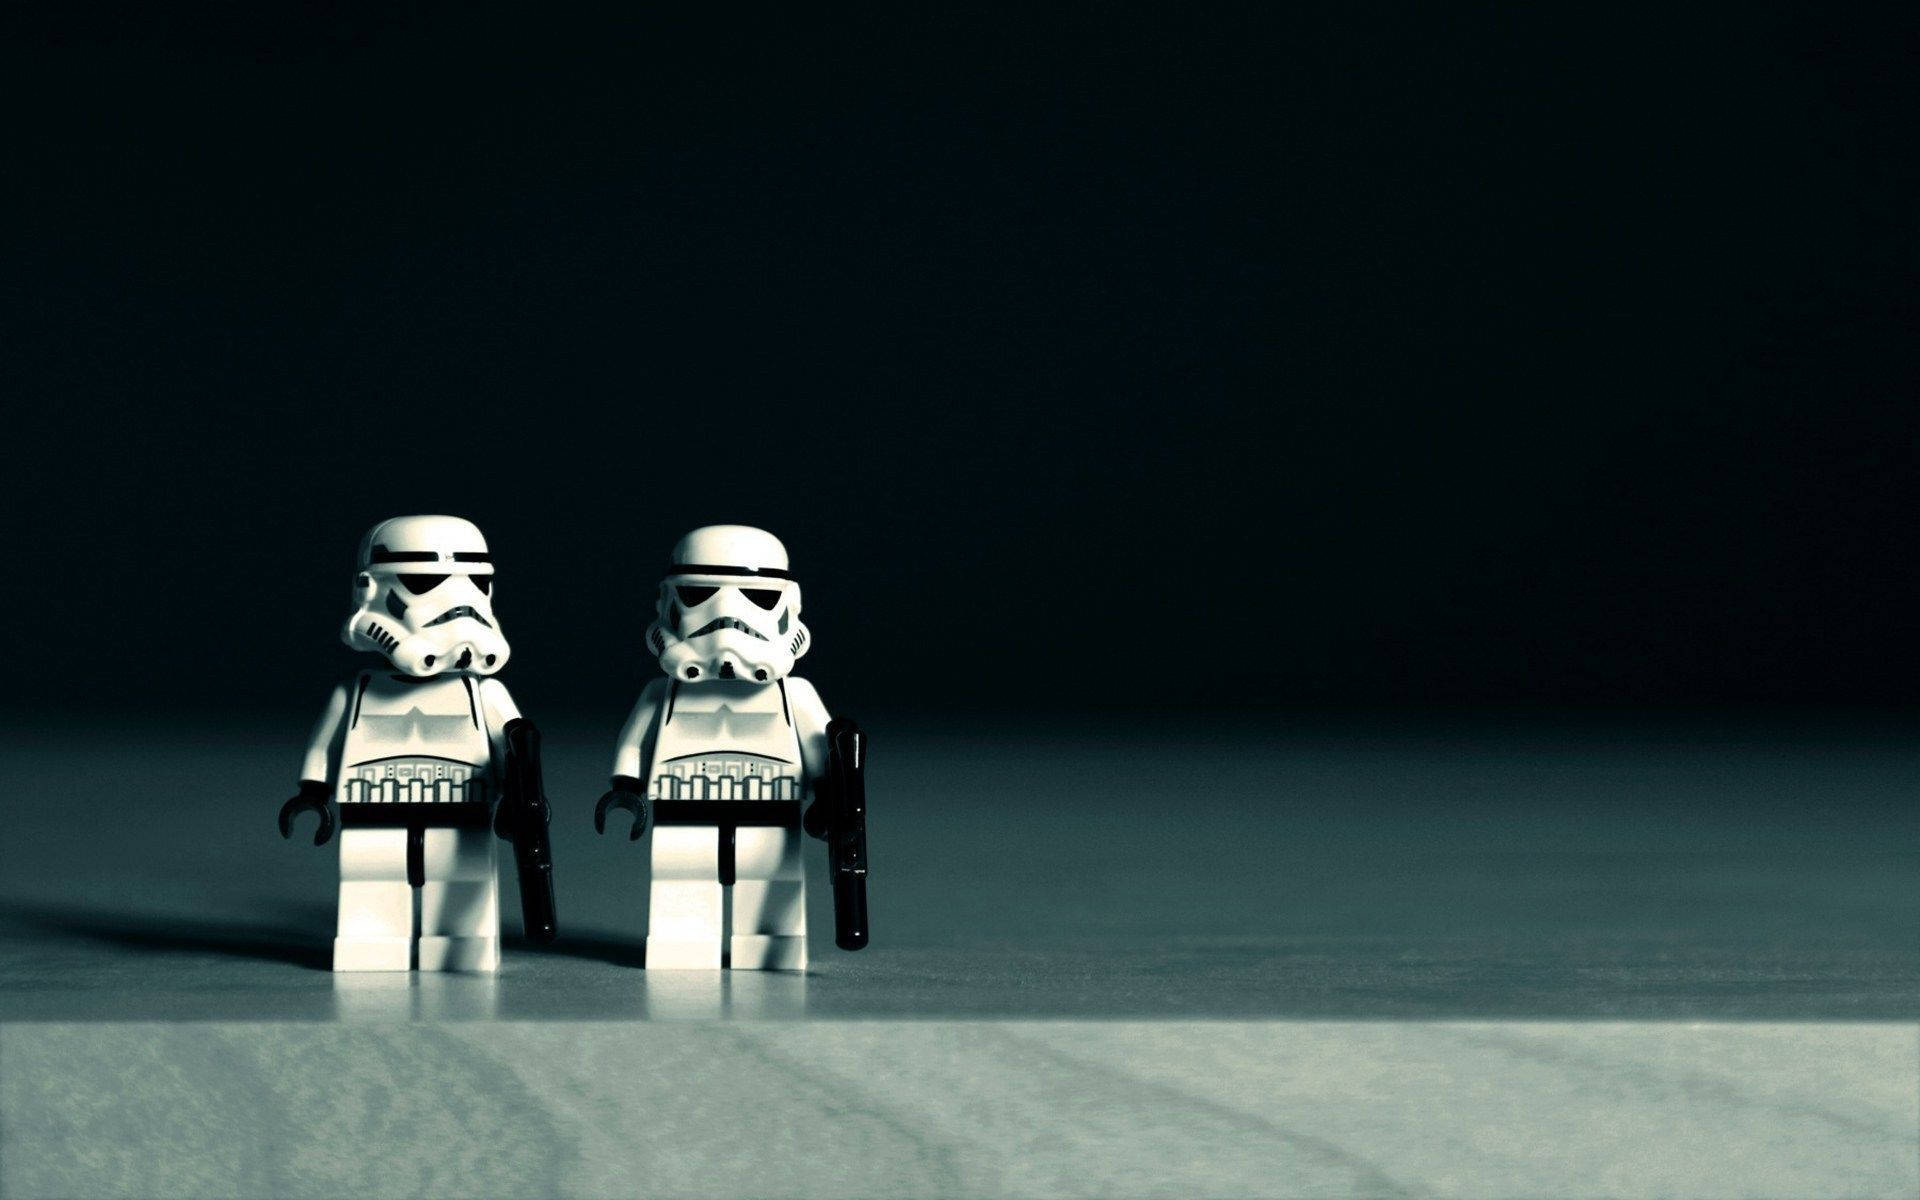 Awesome Lego Stormtroopers